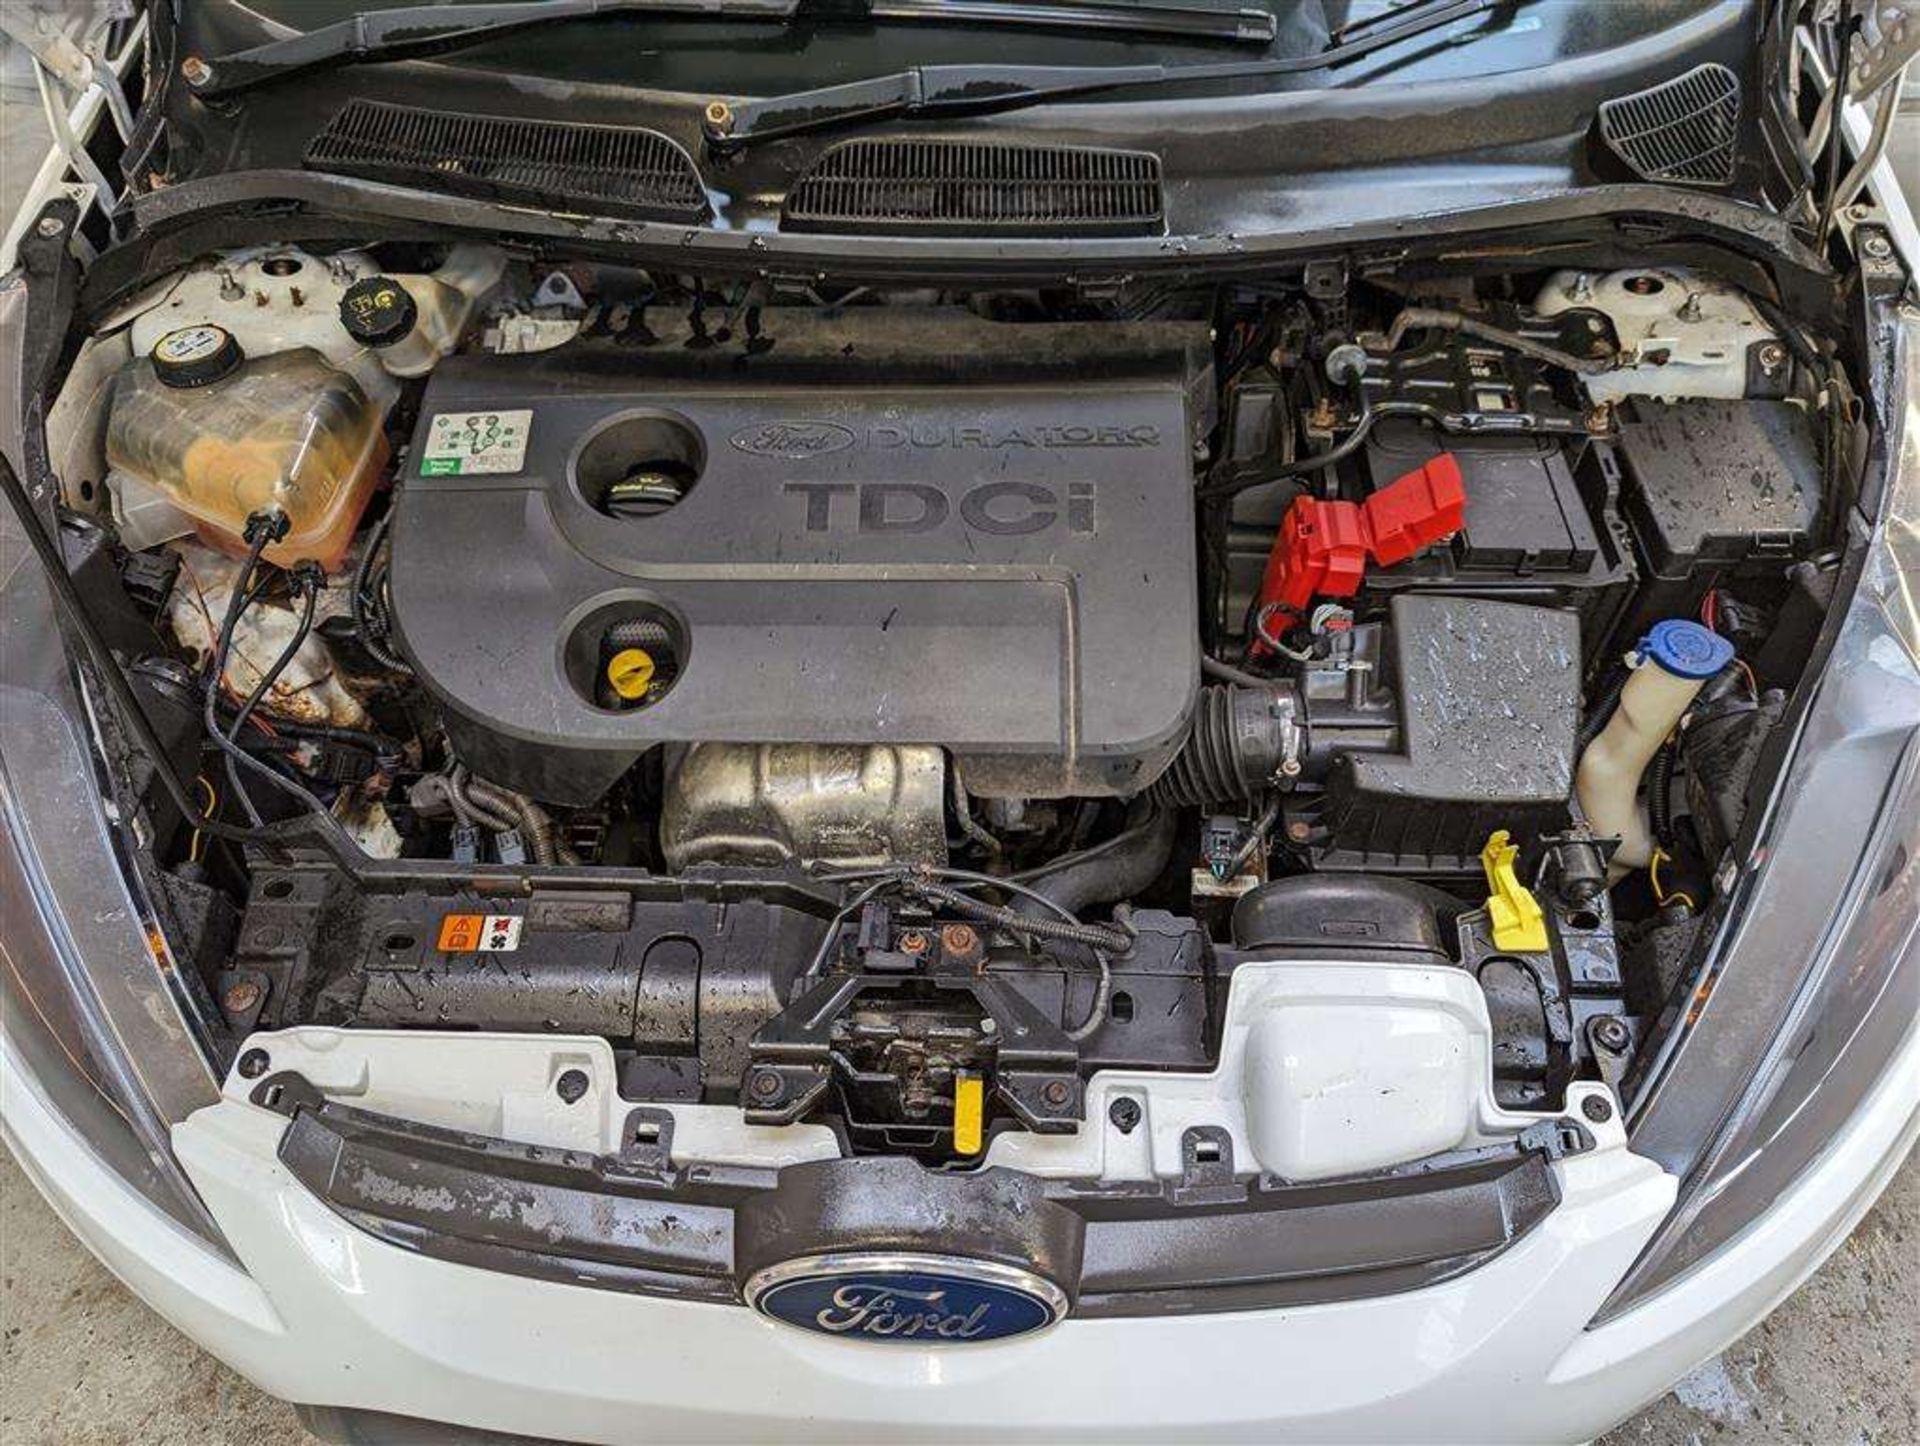 2010 FORD FIESTA BASE TDCI 68 - Image 18 of 20